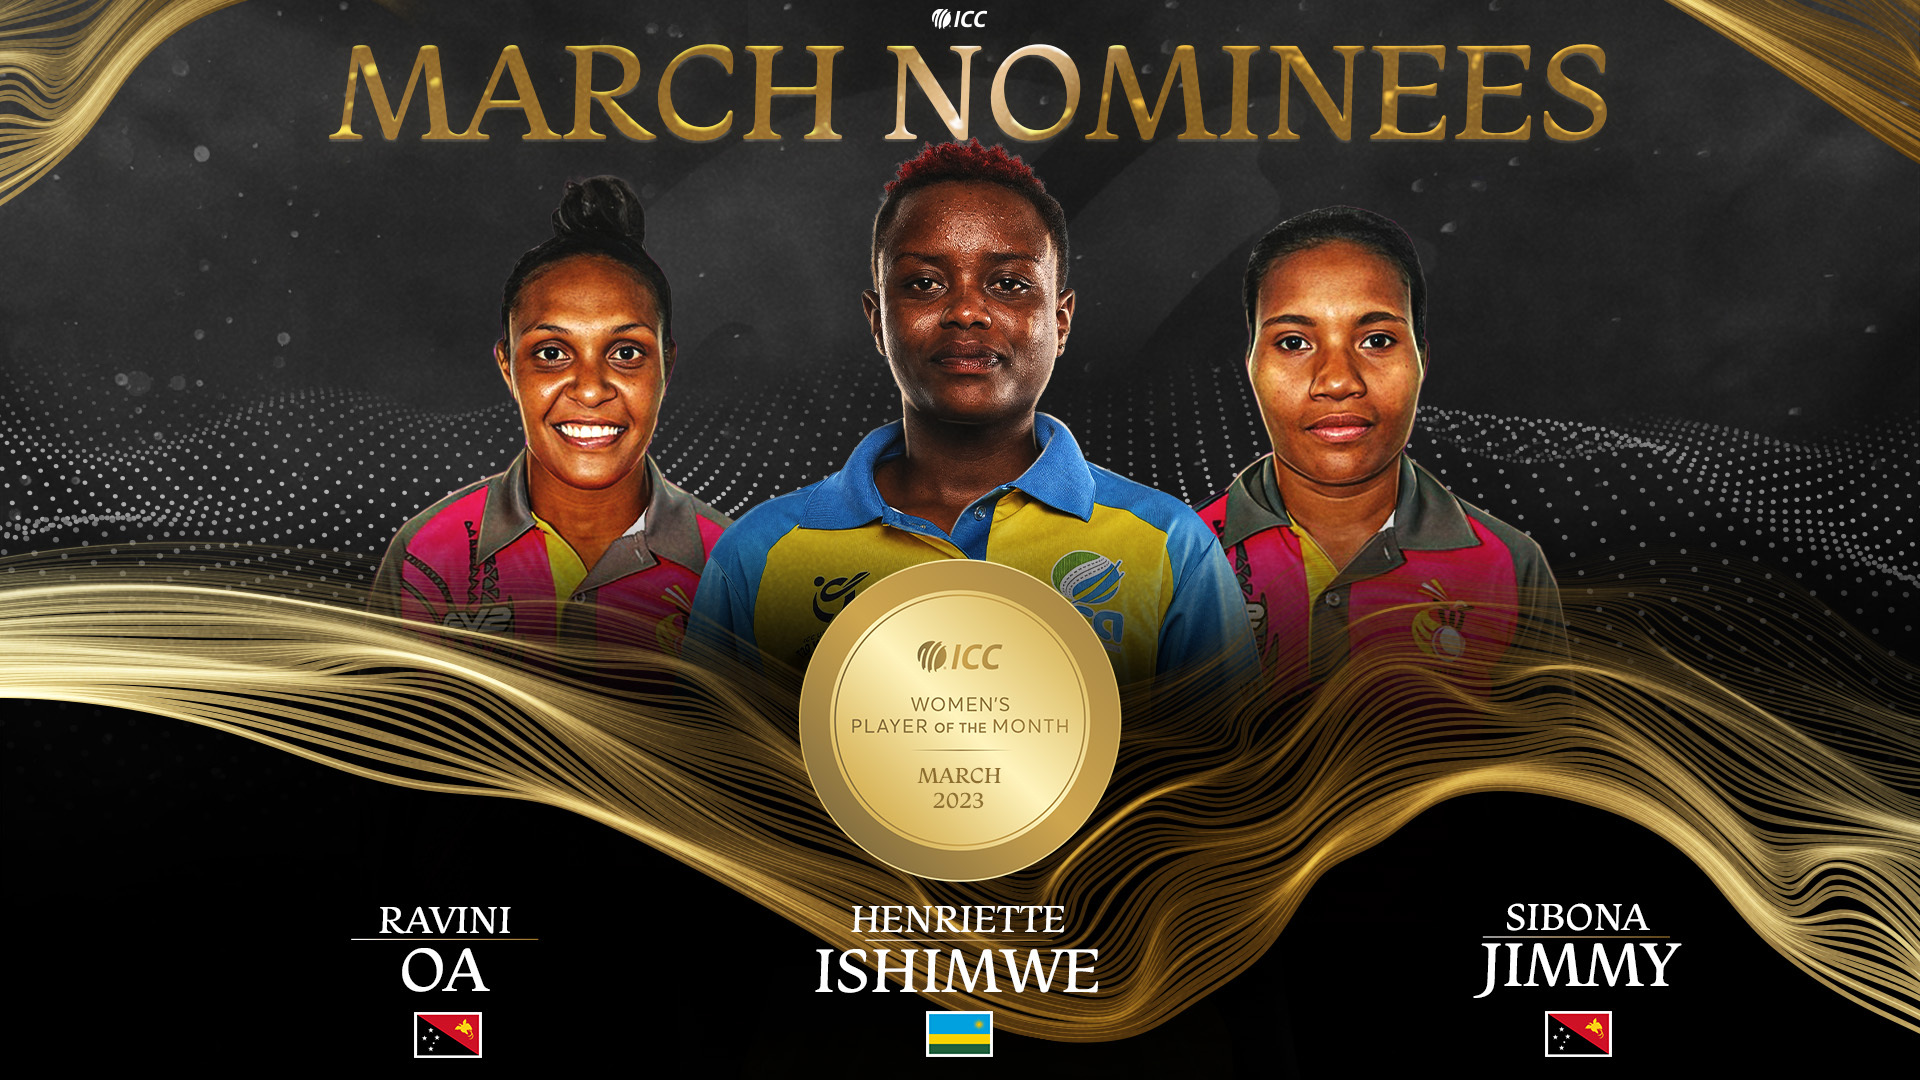 Henriette Ishimwe bags ICC Player of the Month for March 2023